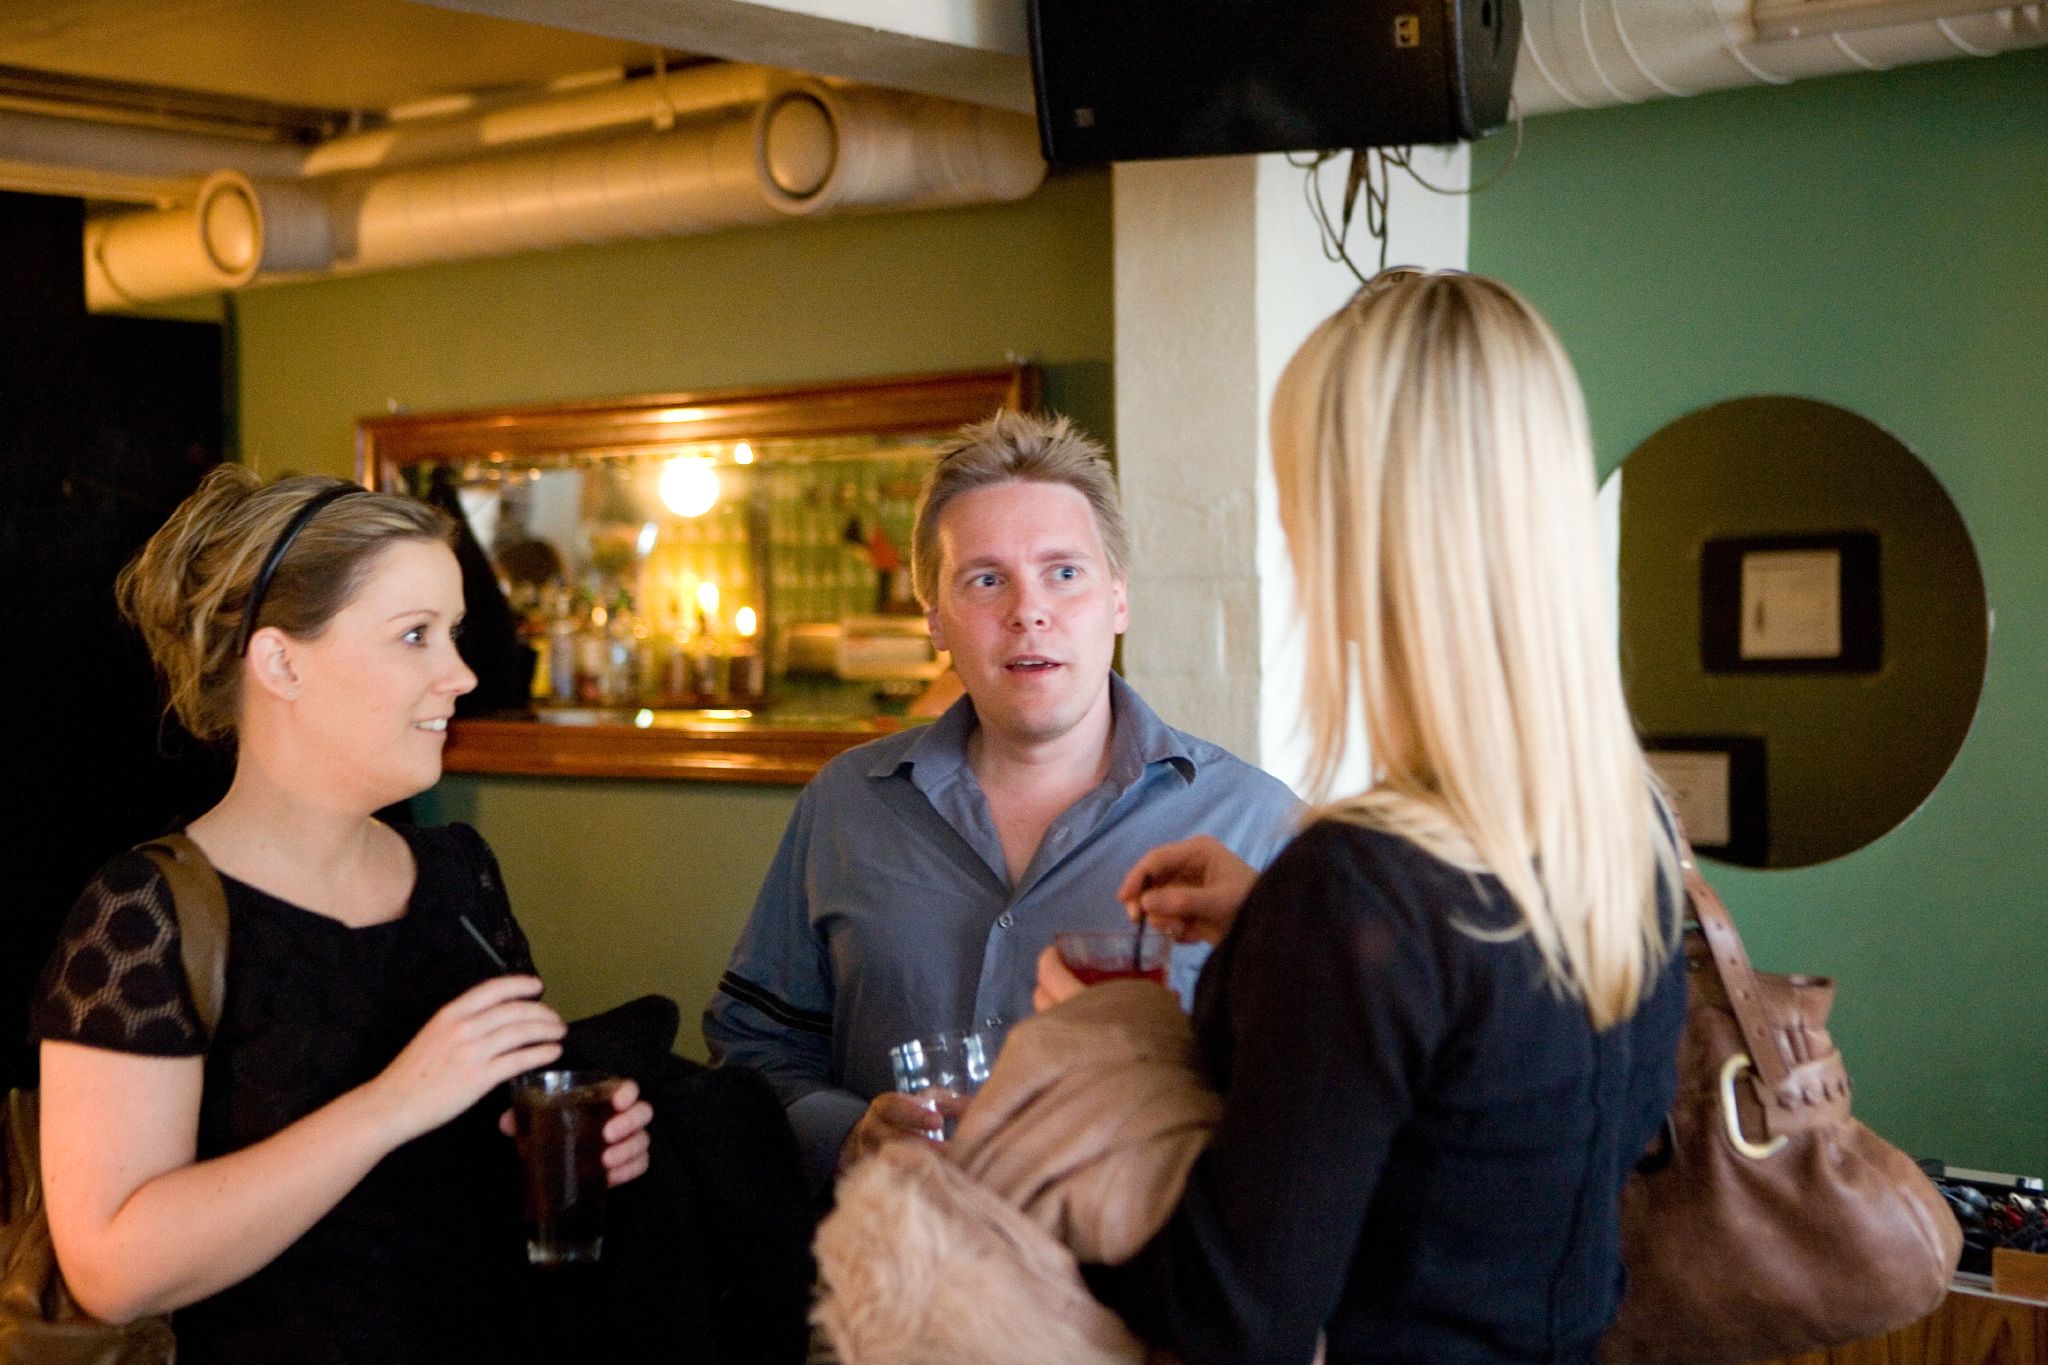 two women and a man having drinks while another woman is talking